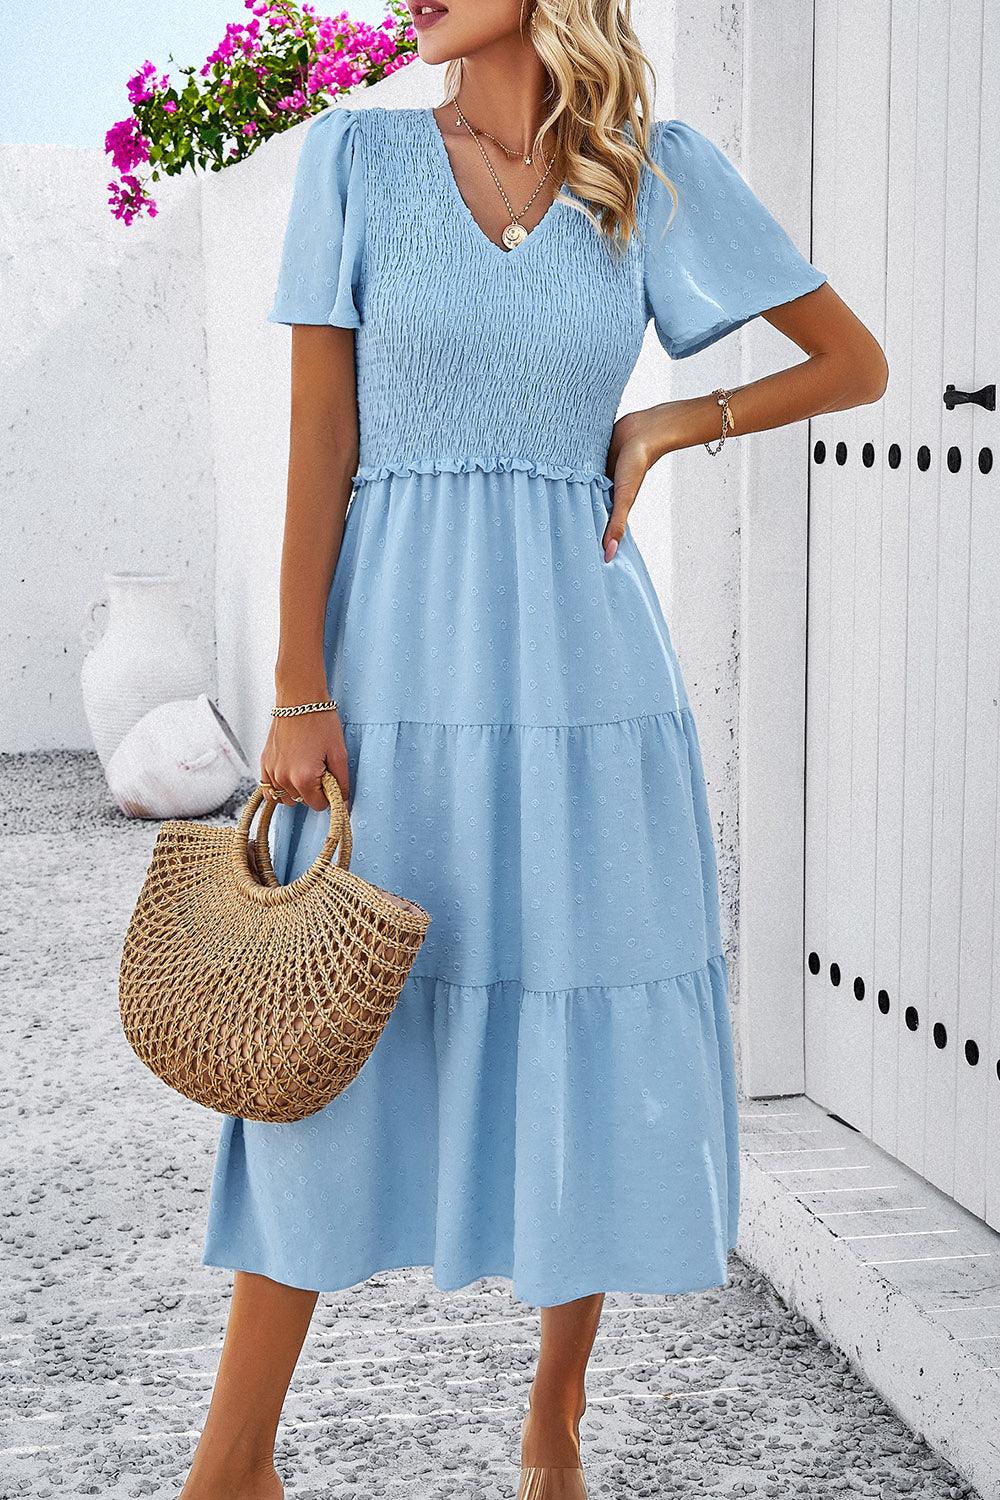 a woman in a blue dress holding a straw bag